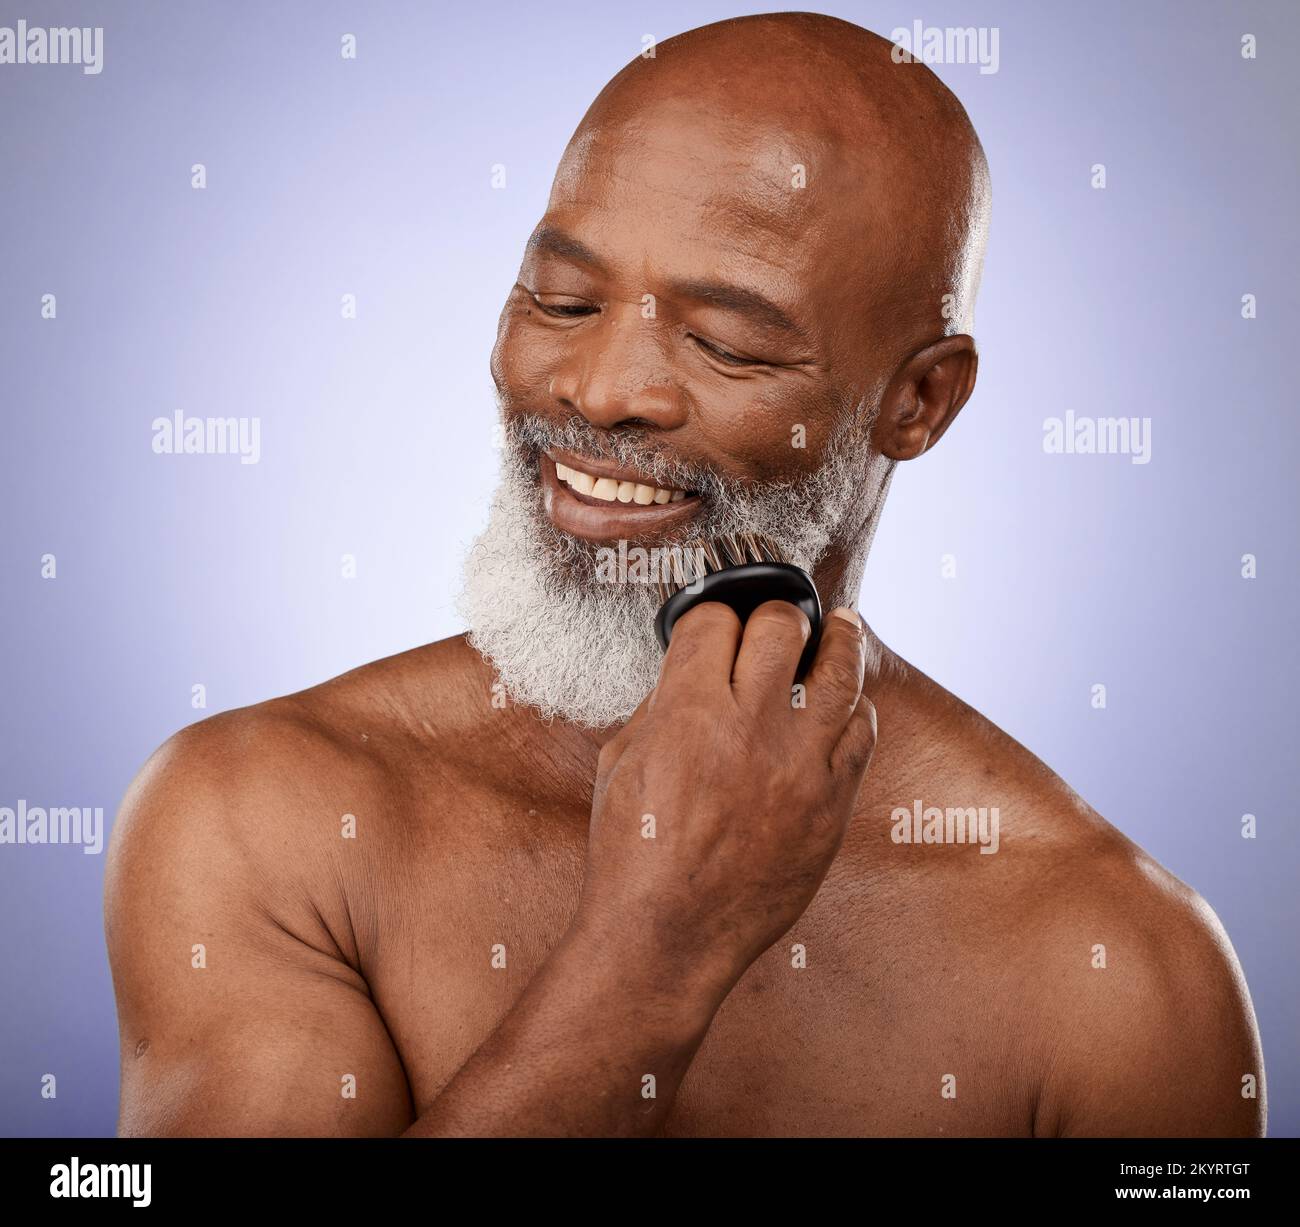 Beauty, brush and grooming with black man and beard for hair care, style or barber. Self care, hygiene and growth with face of old man for natural Stock Photo